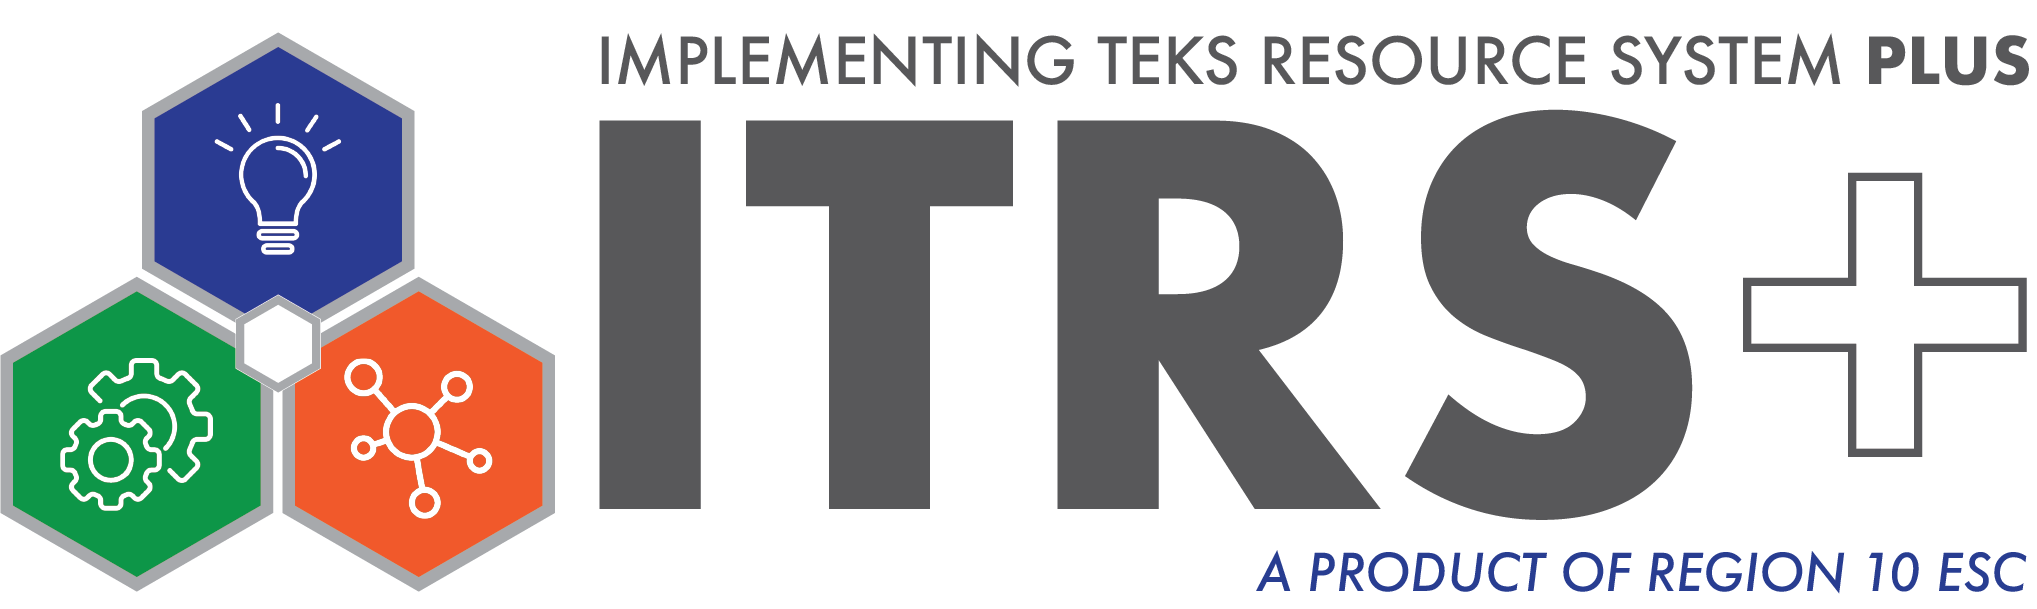 ITRS+ logo Implementing TEKS RS Plus. A product of Region 10 ESC.